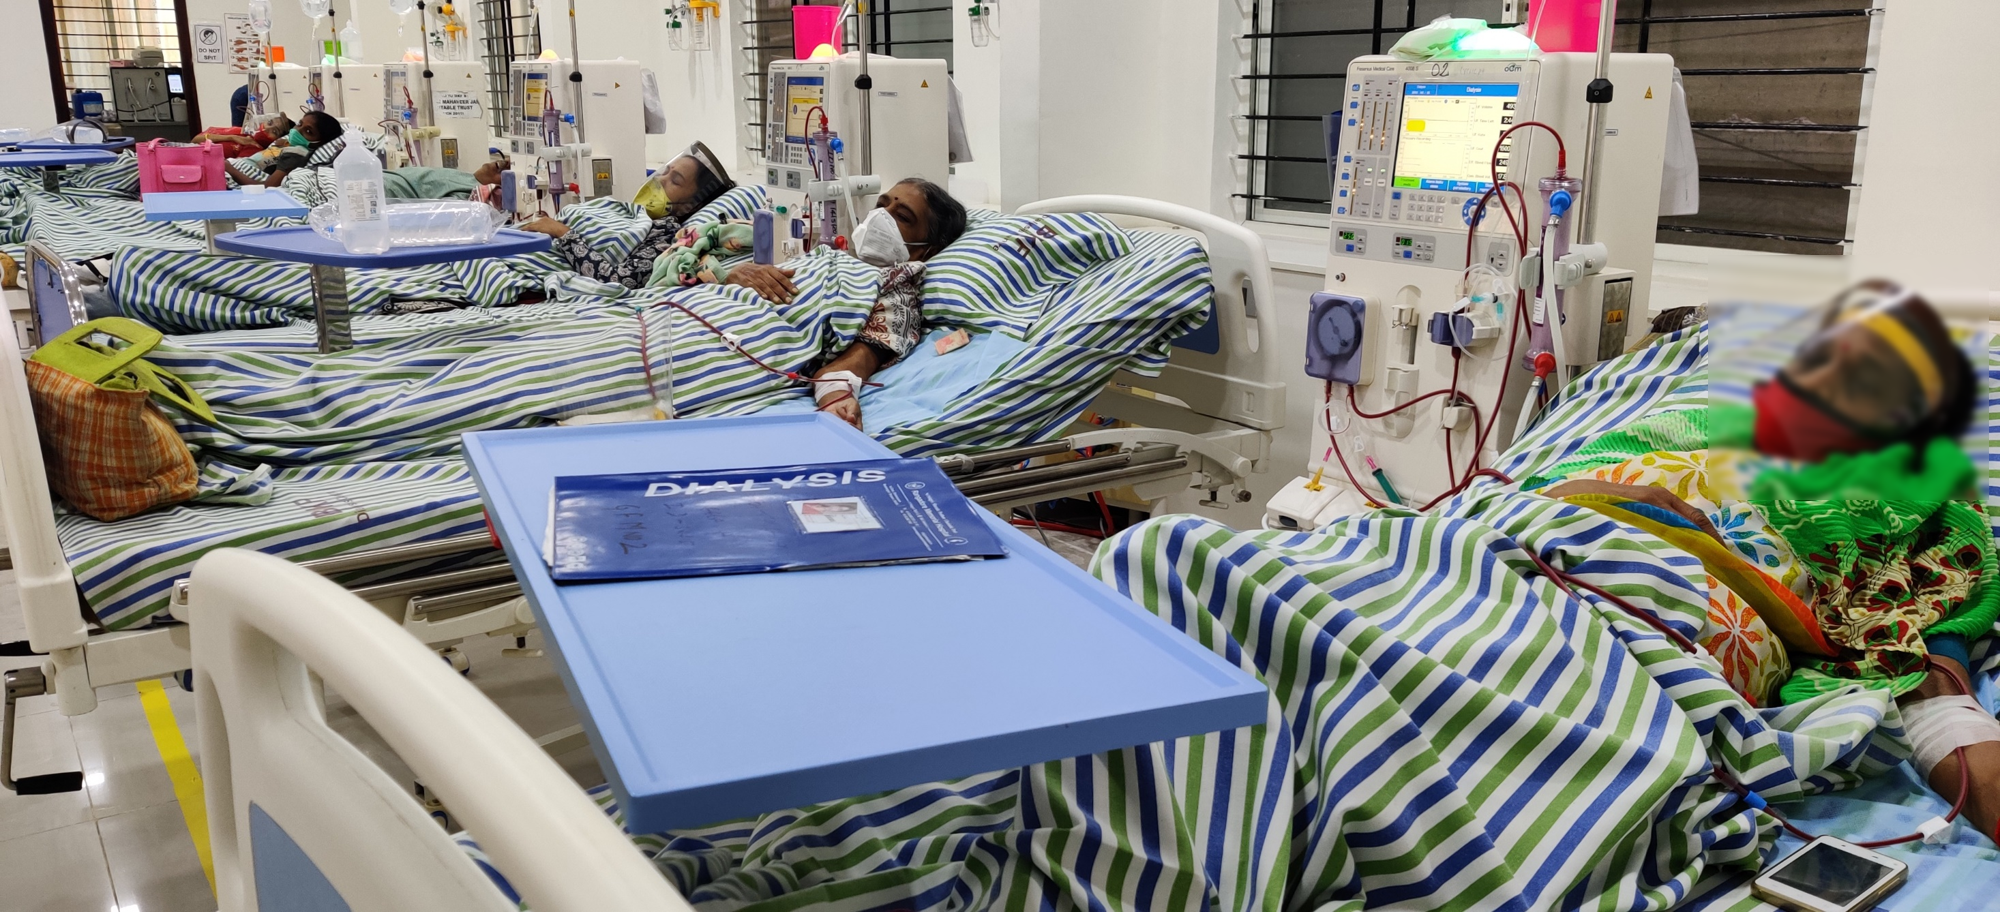 patients sleeping on their beds getting medical treatment